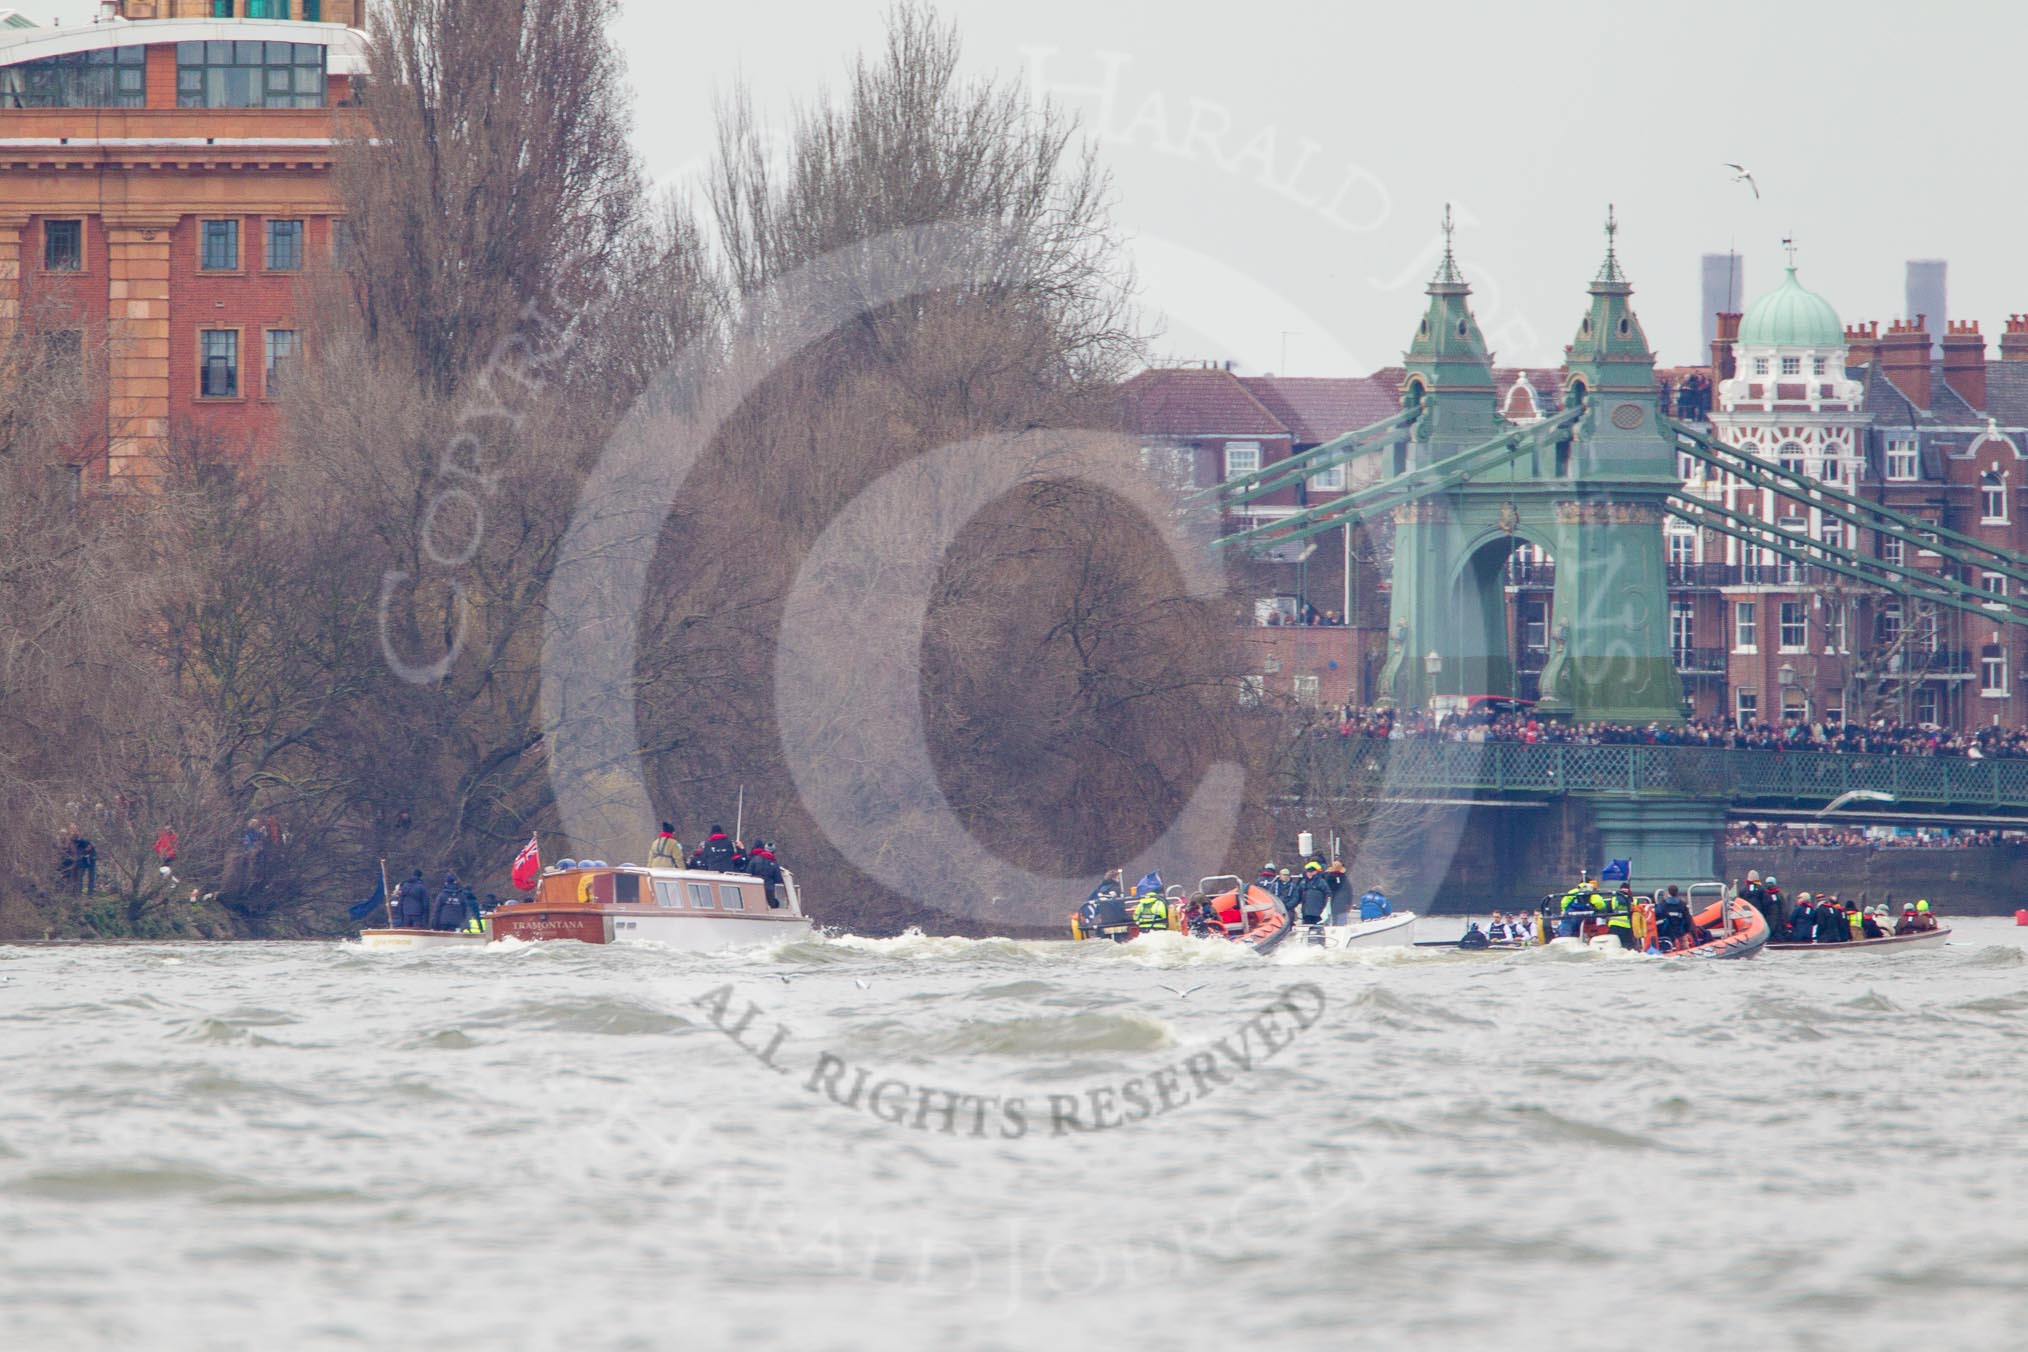 The Boat Race 2013.
Putney,
London SW15,

United Kingdom,
on 31 March 2013 at 16:35, image #333